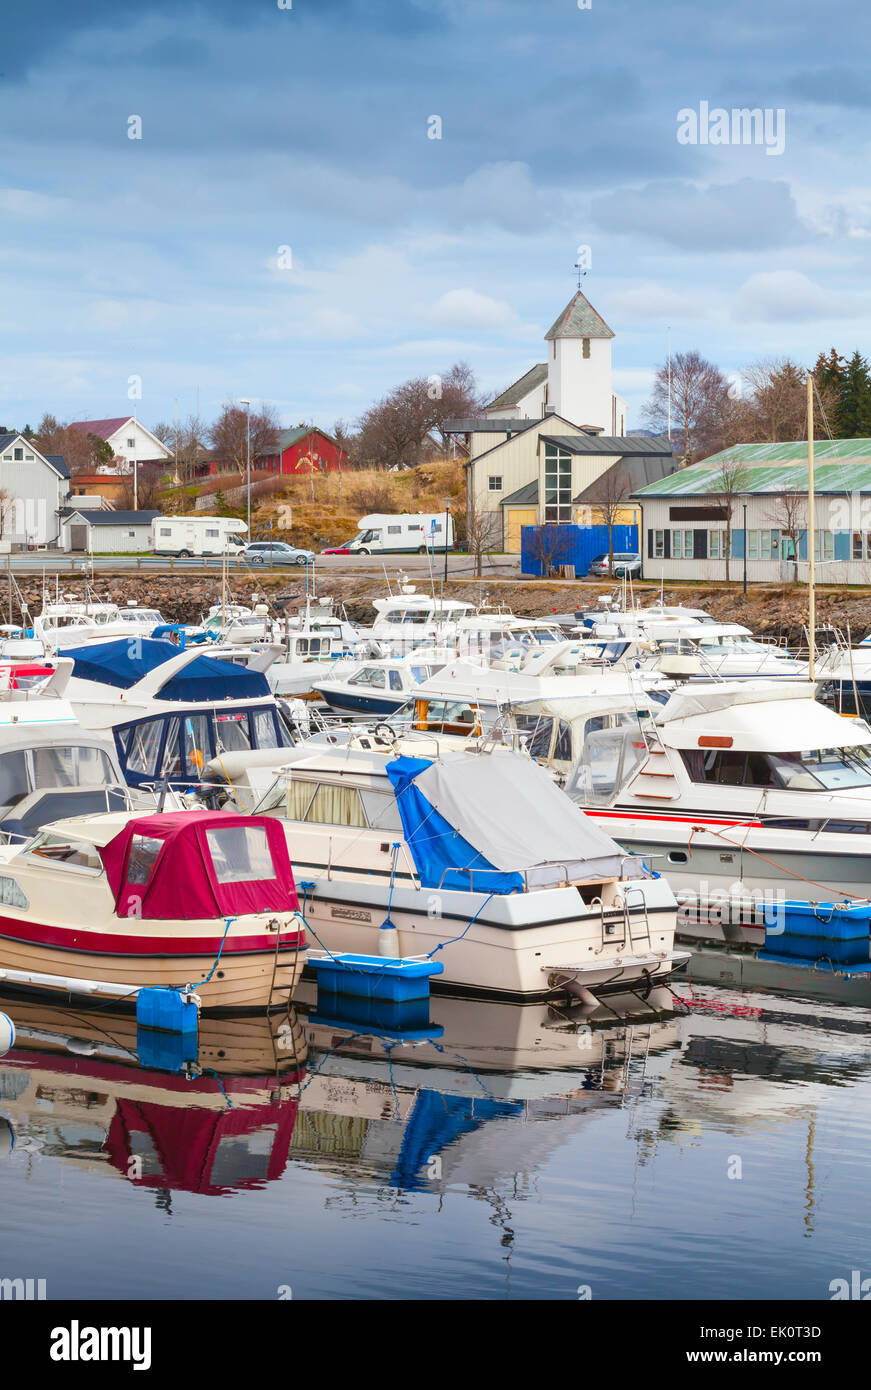 Typically Norwegian fishing village landscape. Small boats are moored in marina Stock Photo